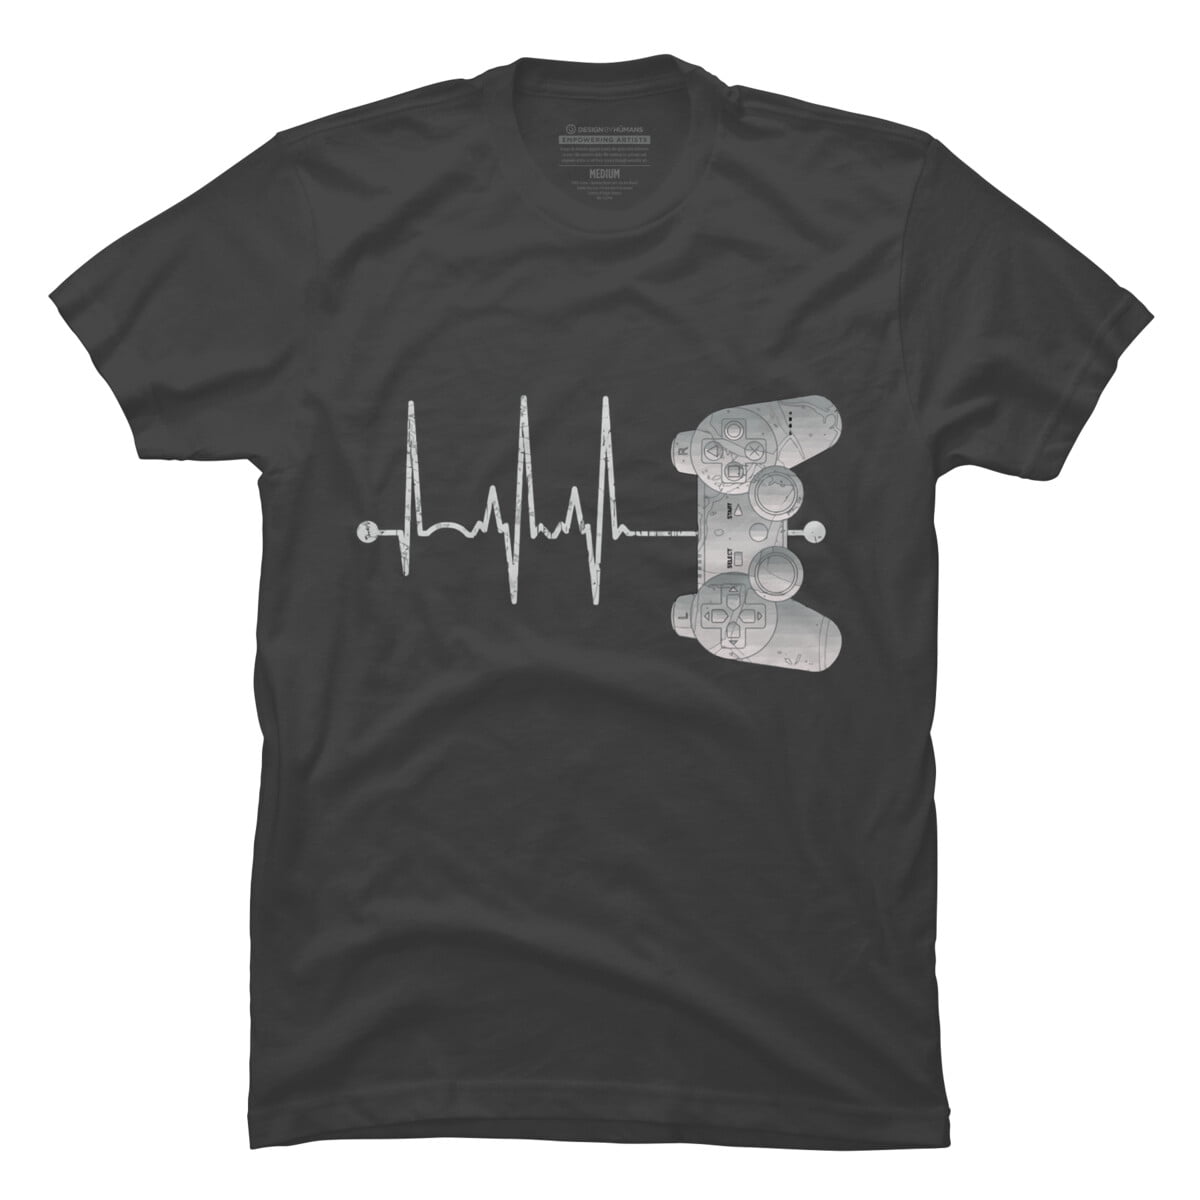 Gamer Heartbeat Teenage Boys Gifts Ideas Gaming Mens Charcoal Gray Graphic Tee - Design By Humans  3XL